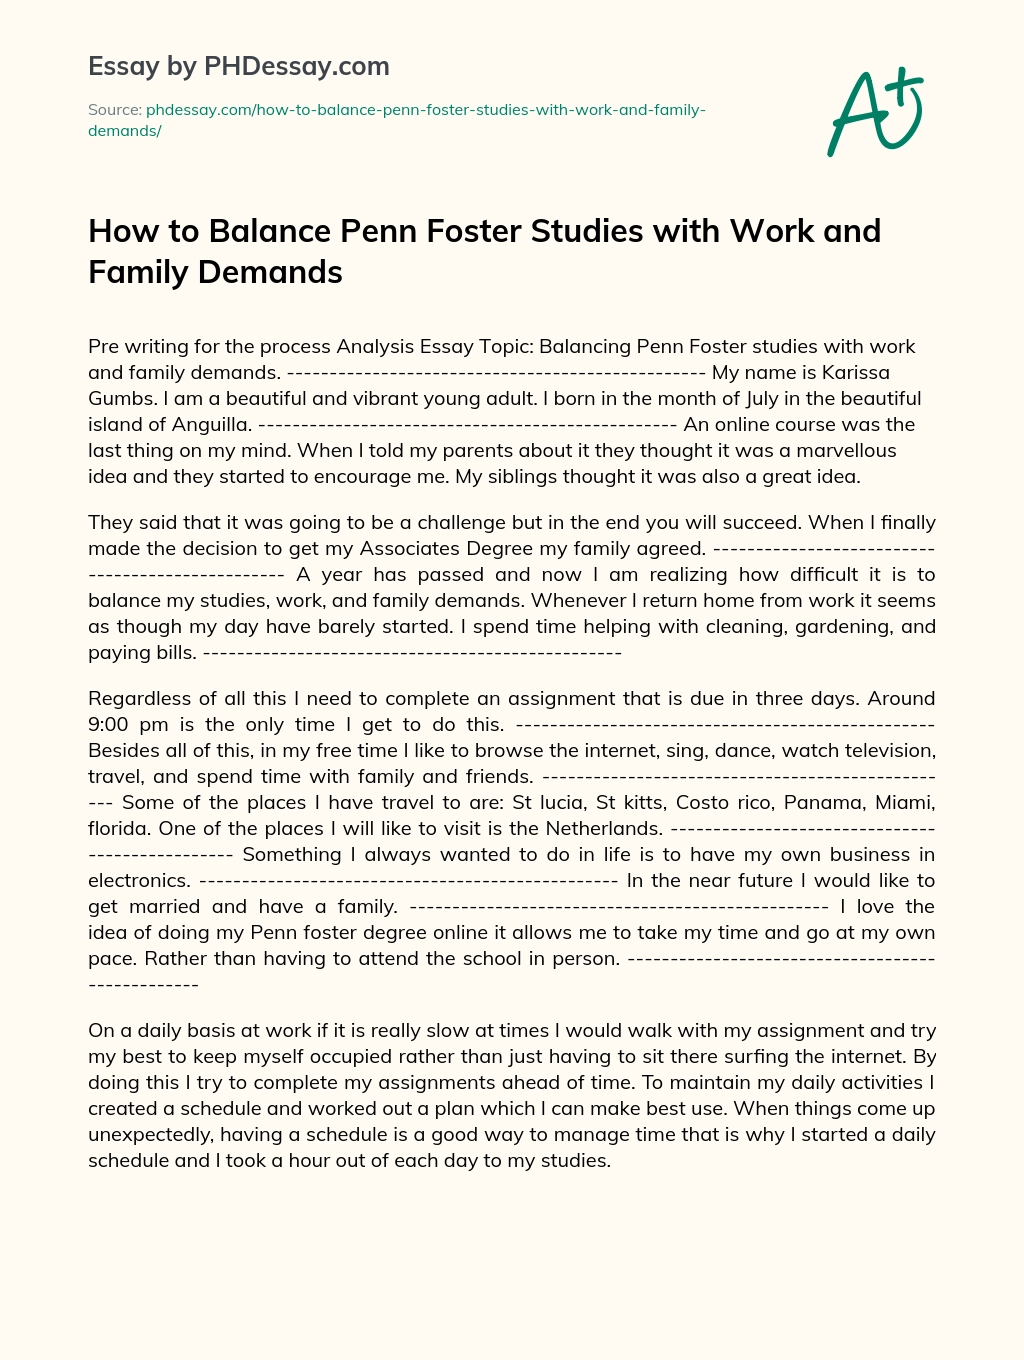 How to Balance Penn Foster Studies with Work and Family Demands